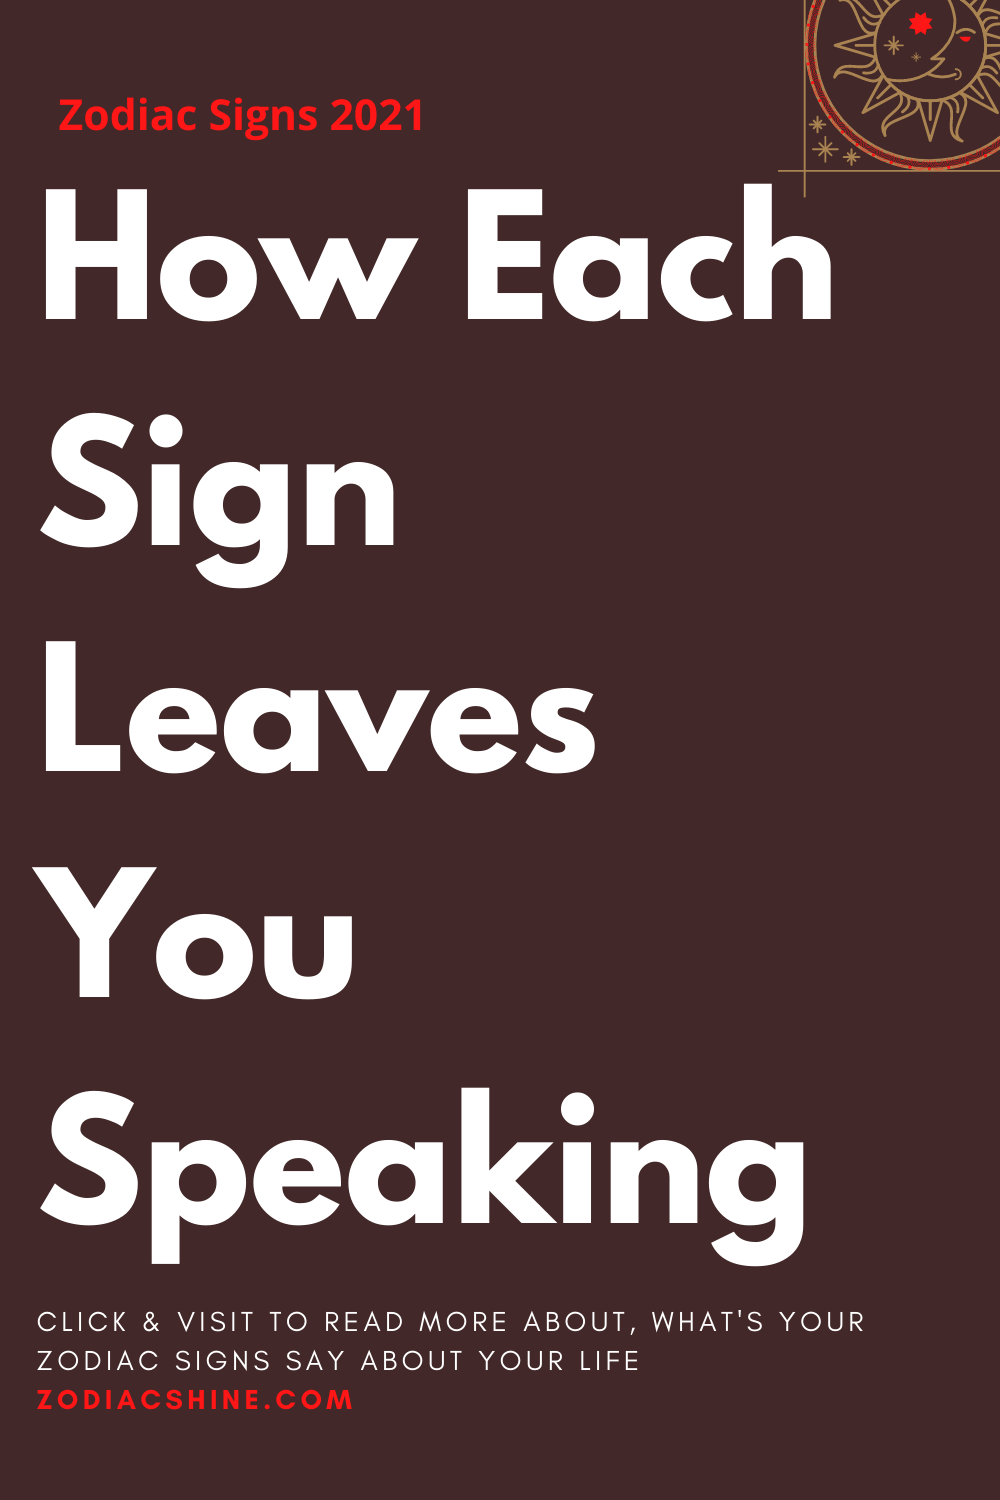 How Each Sign Leaves You Speaking